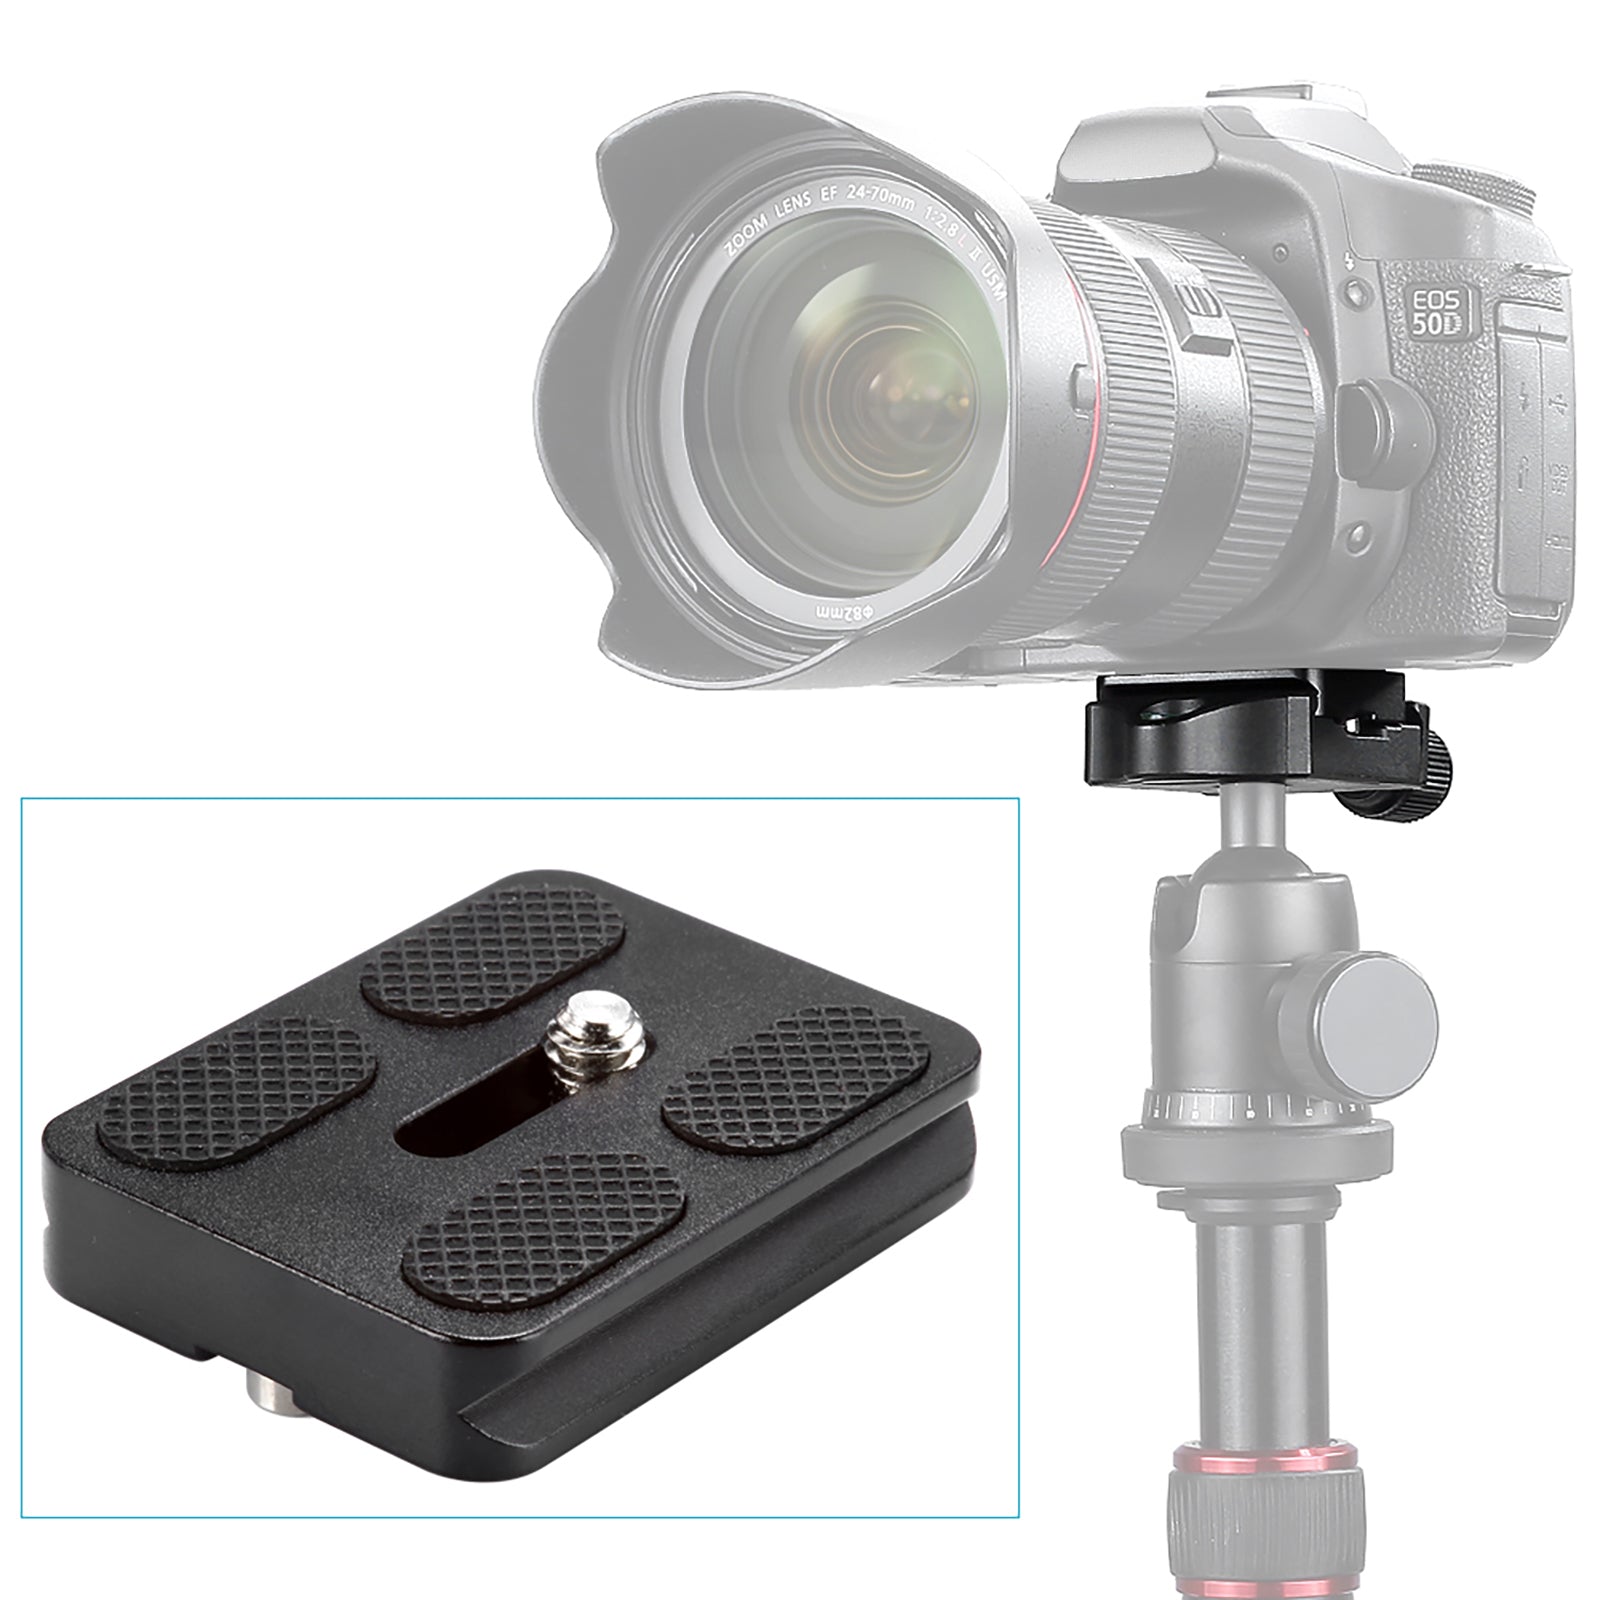 2 Pieces Metal Quick Release Plate with 1/4''-20 Camera Screw Tripod Mount  Plate Fits Standard for DSLR Camera Tripod Ball Head, Black (PU50)